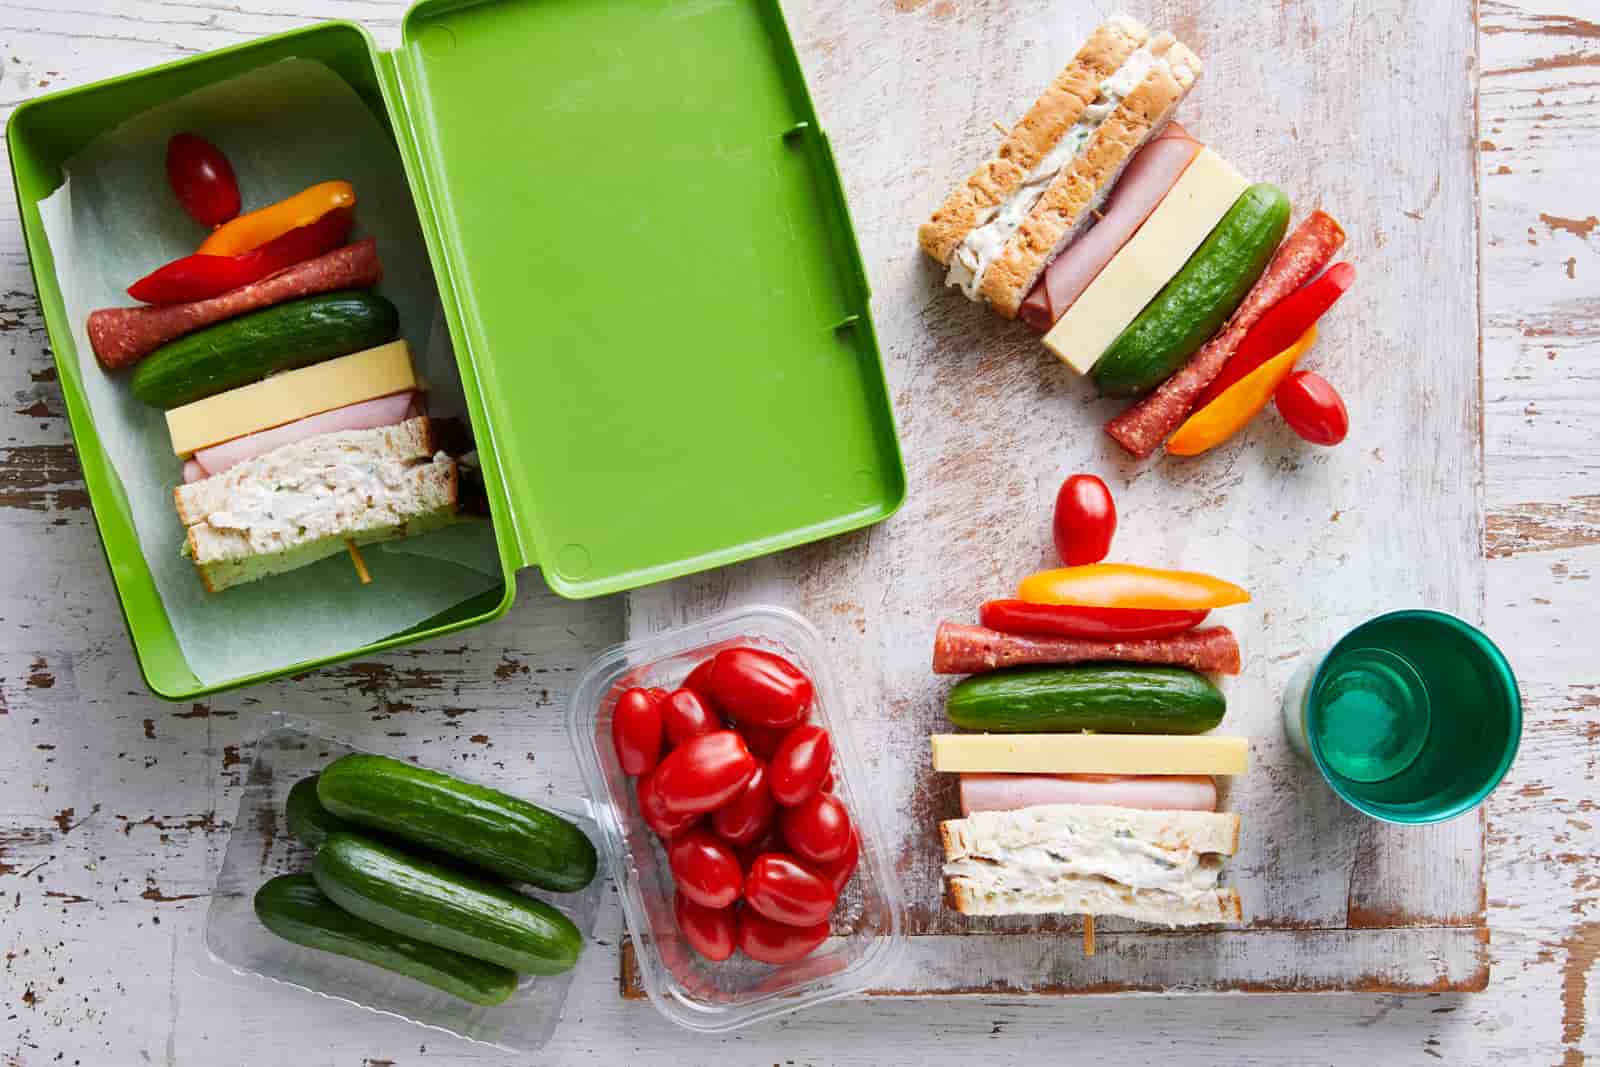 Sandwiches on a skewer in a green lunchbox and outside, with baby cucumbers and snacking tomatoes next to them.